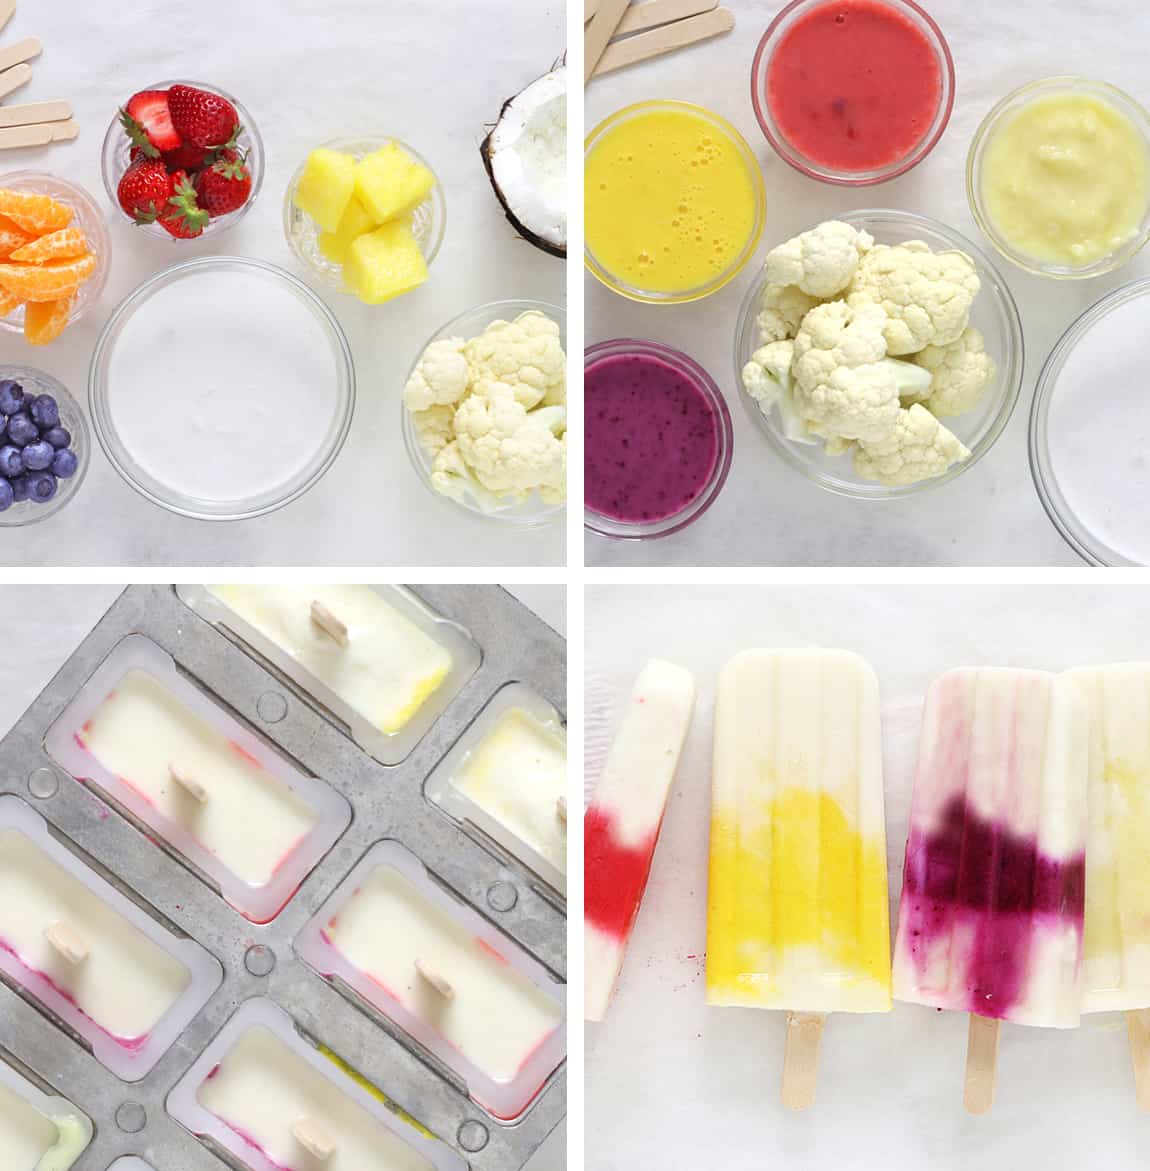 Ingredients and steps for cauliflower creamsicles.